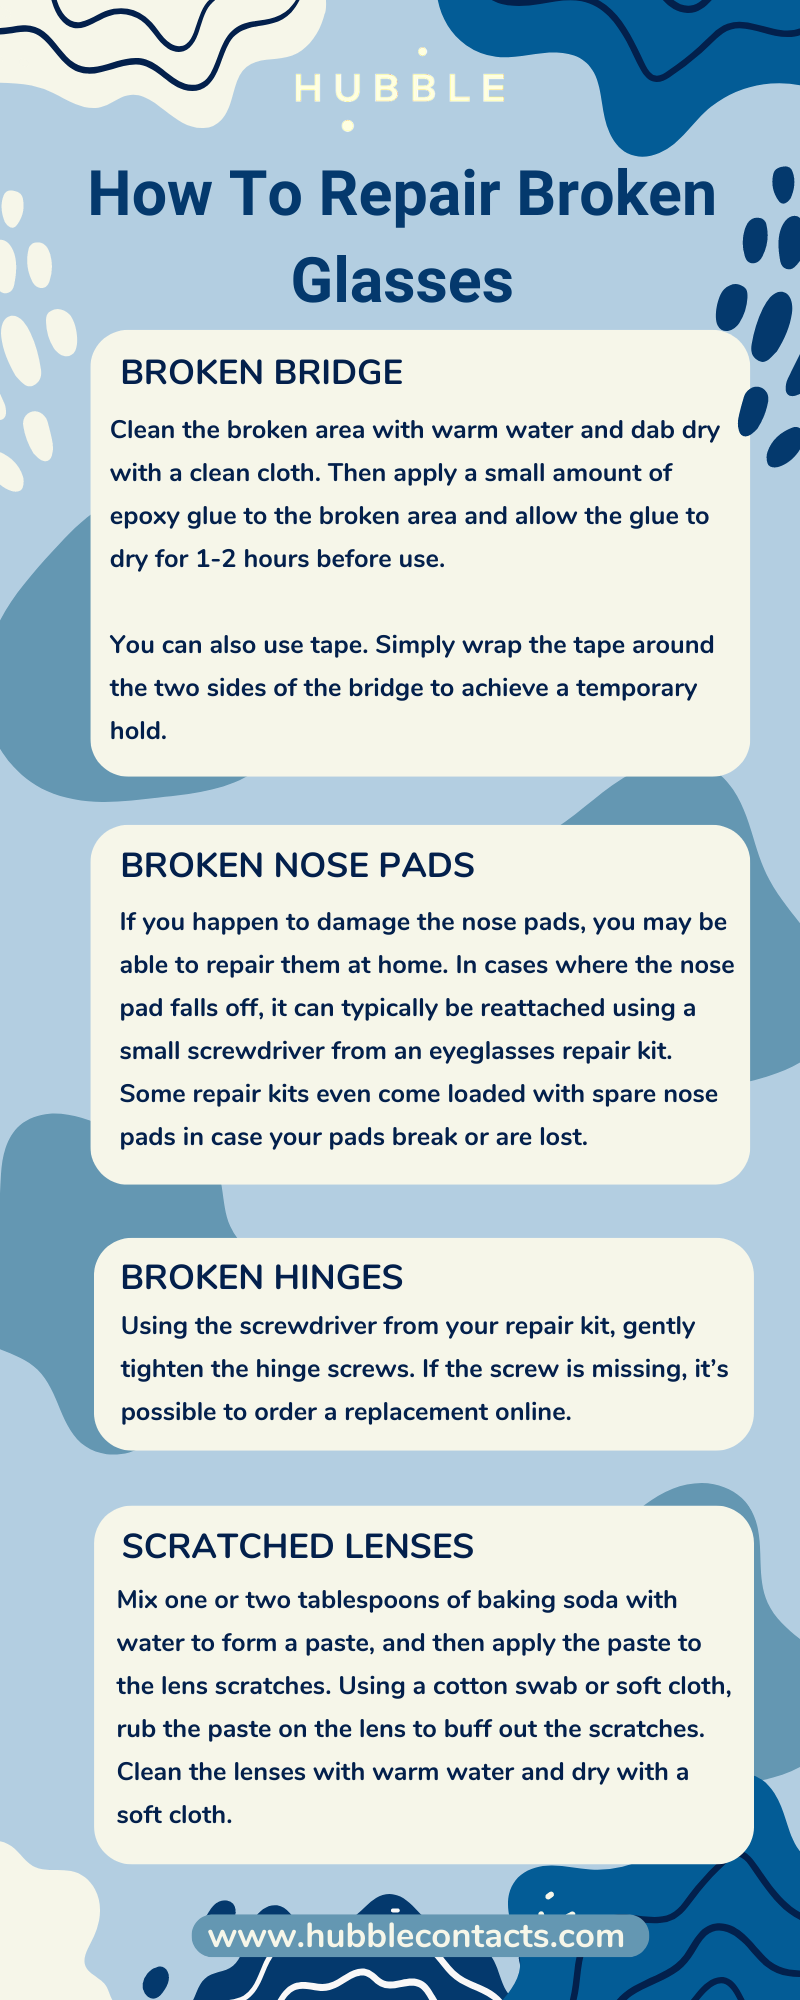 How to Fix Broken Glasses: A Guide to Home Eyeglass Repair